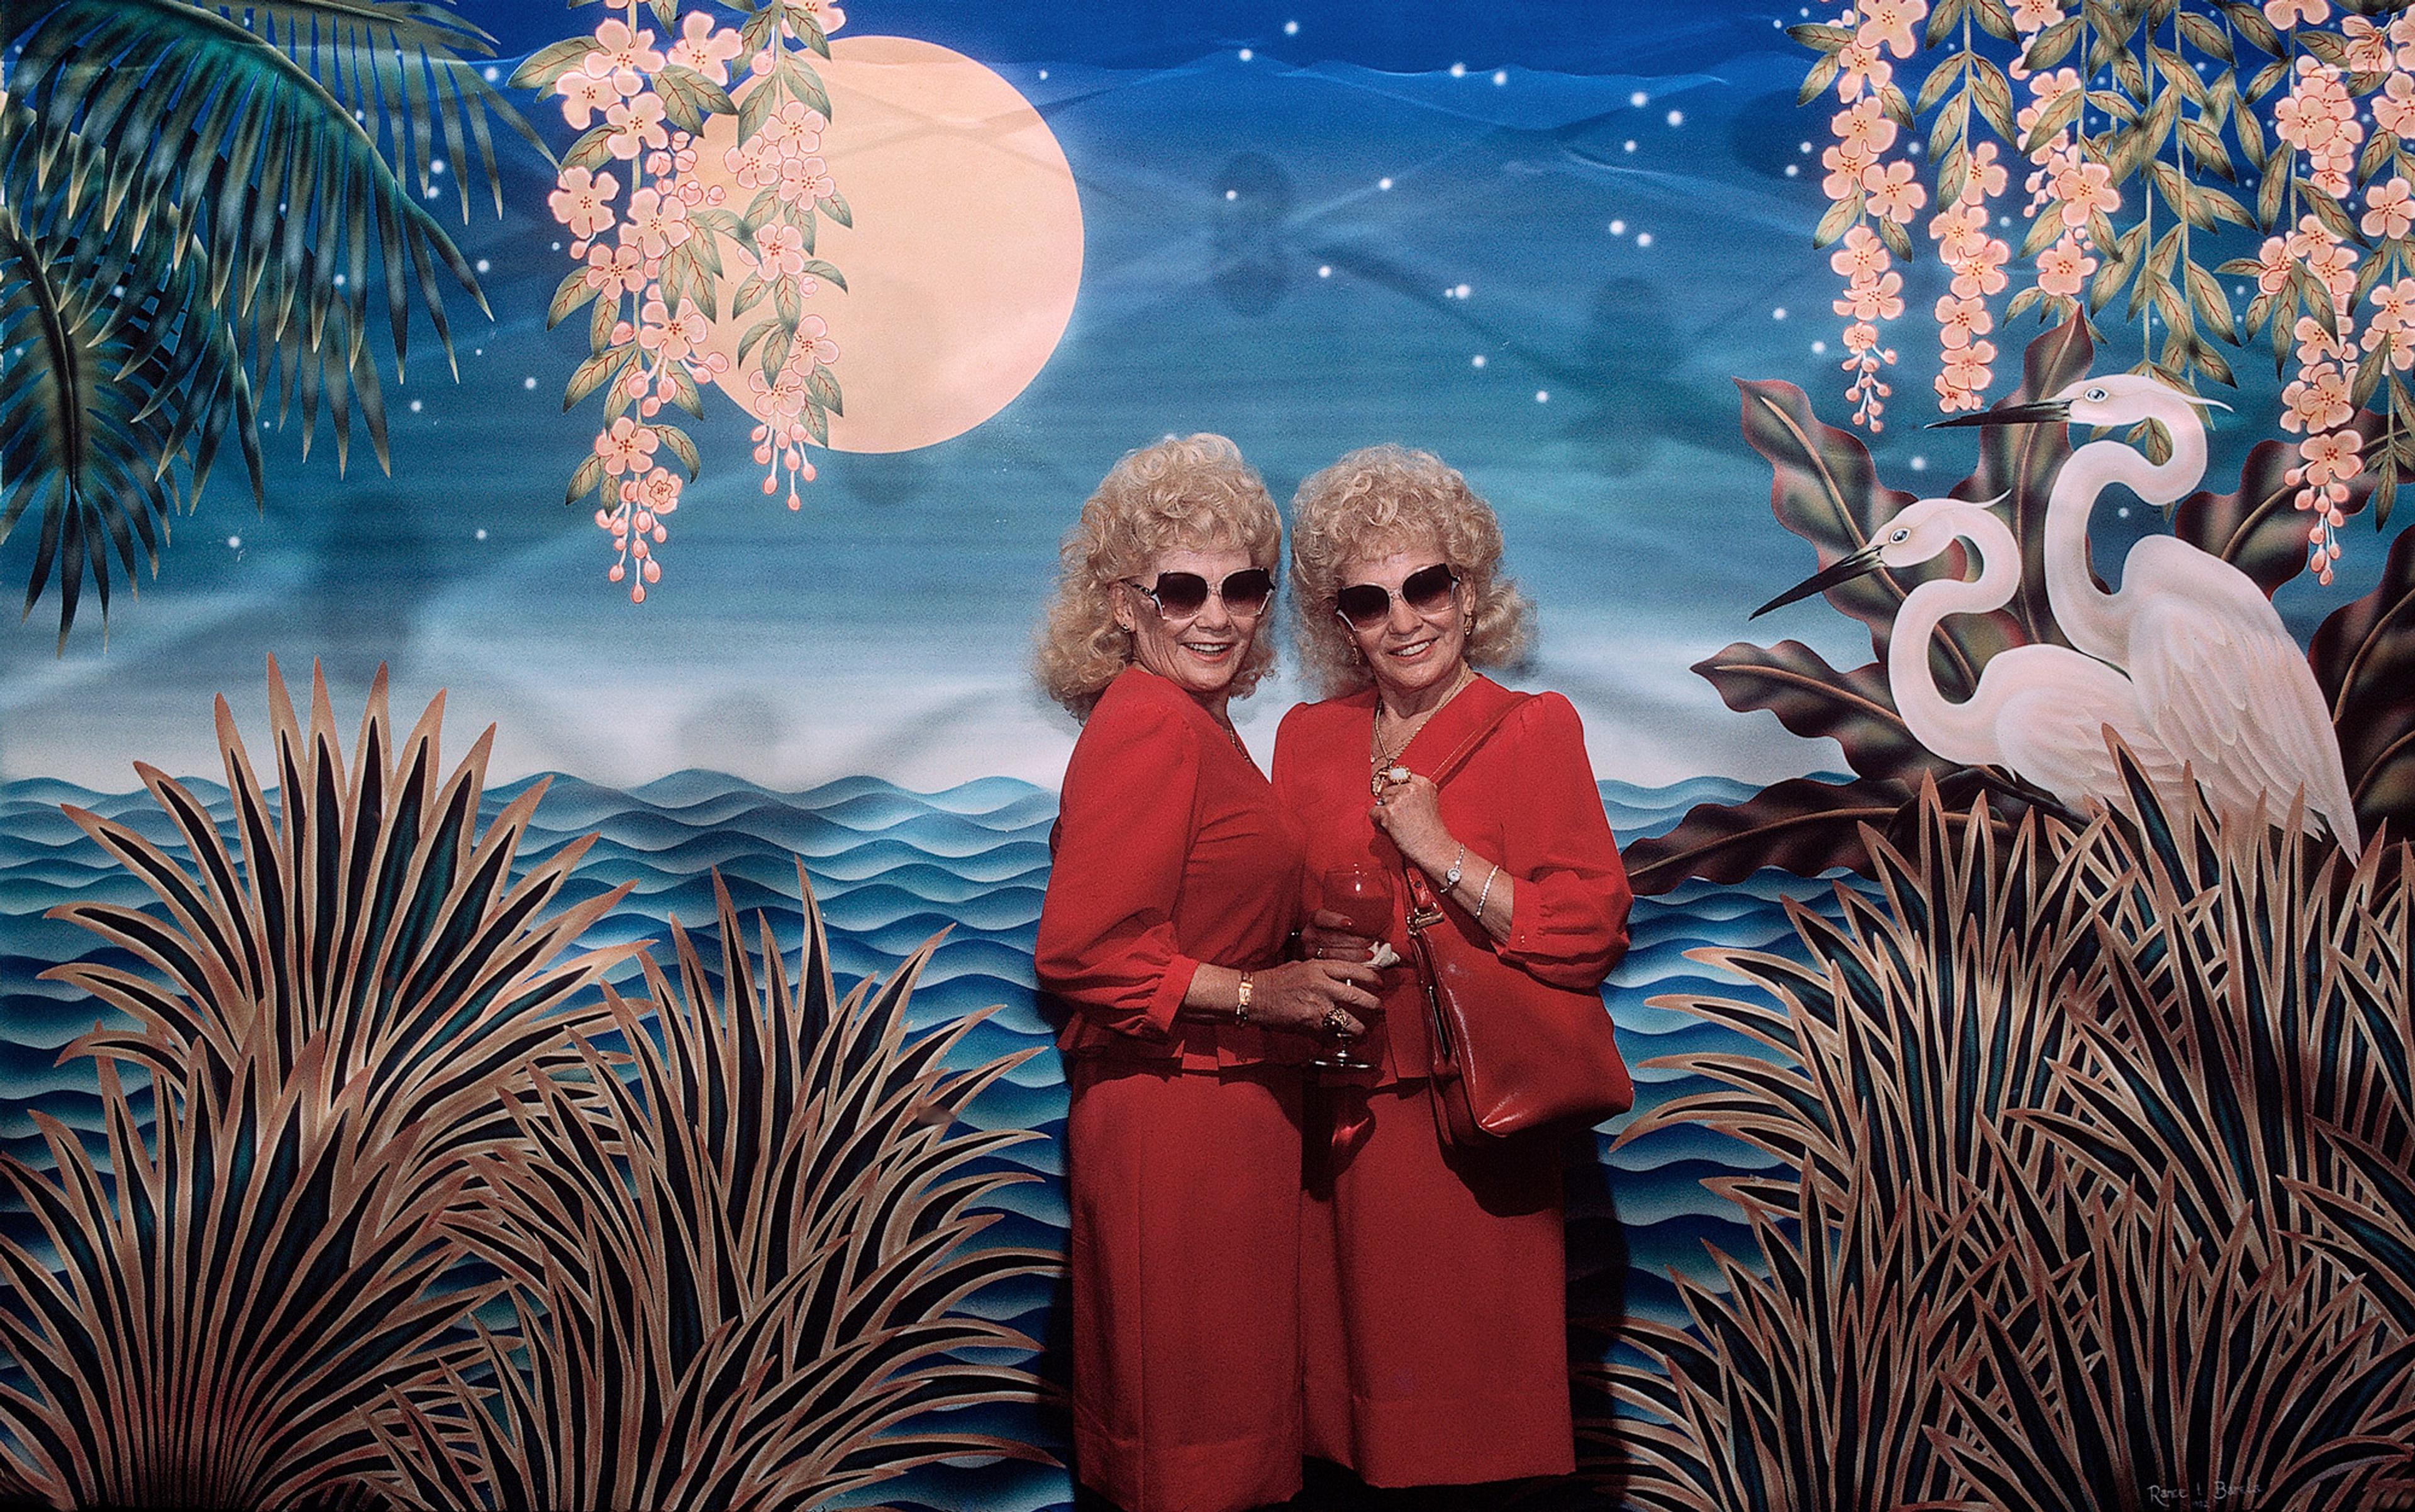 Two elderly women in red dresses and sunglasses standing in front of a tropical mural with birds, flowers, and a full moon.